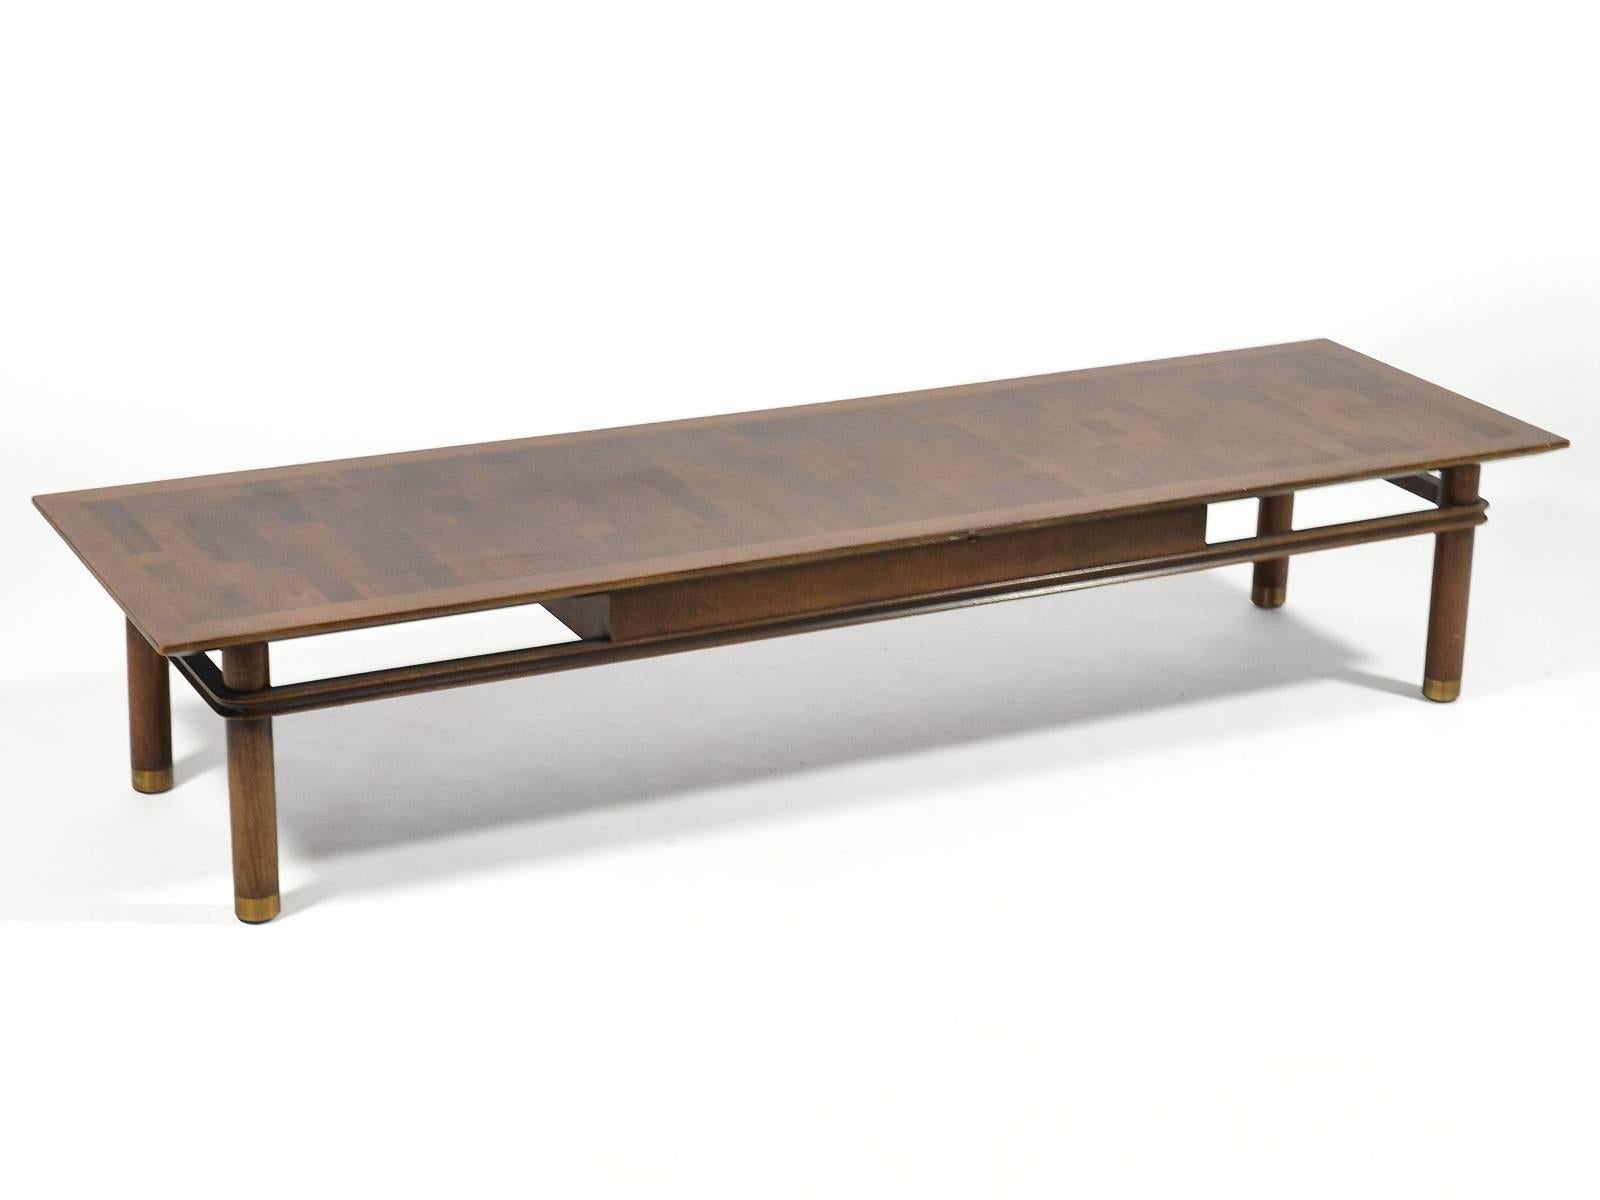 Wood Bert England Long Table or Bench by Johnson Furniture Co.